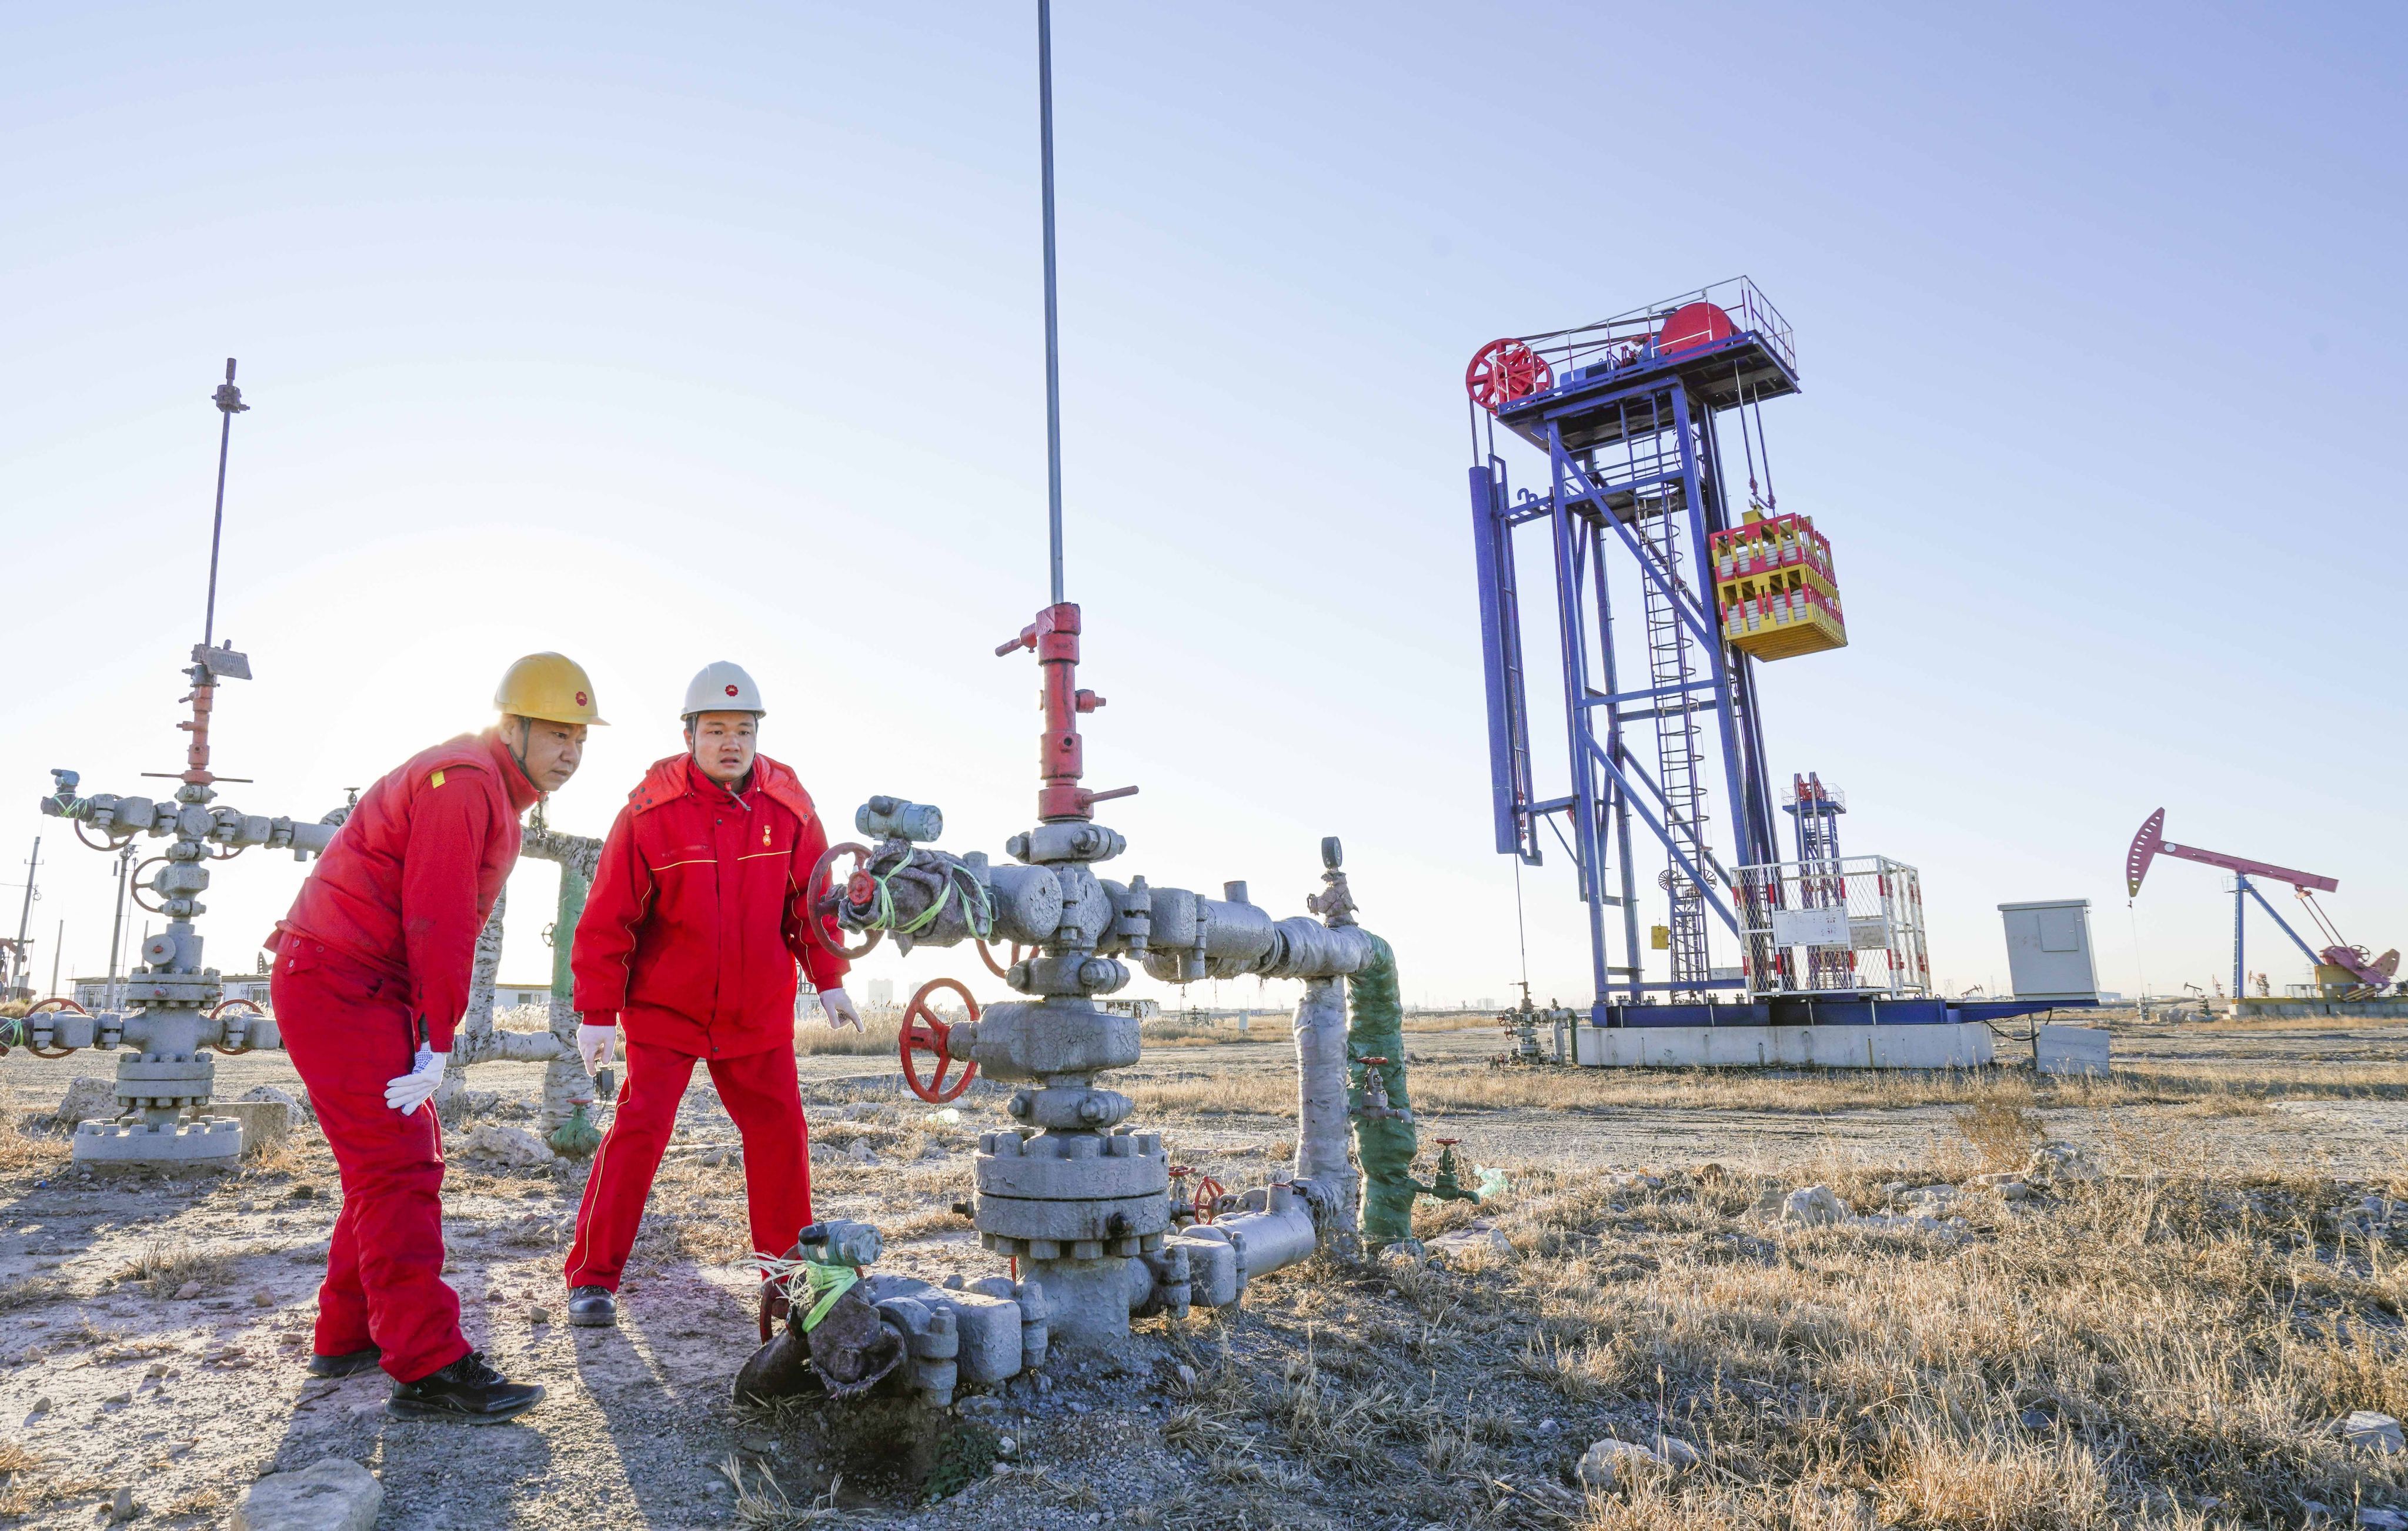 Workers inspect an oil well at Jidong Oilfield in north China’s Hebei Province. Photo: Xinhua